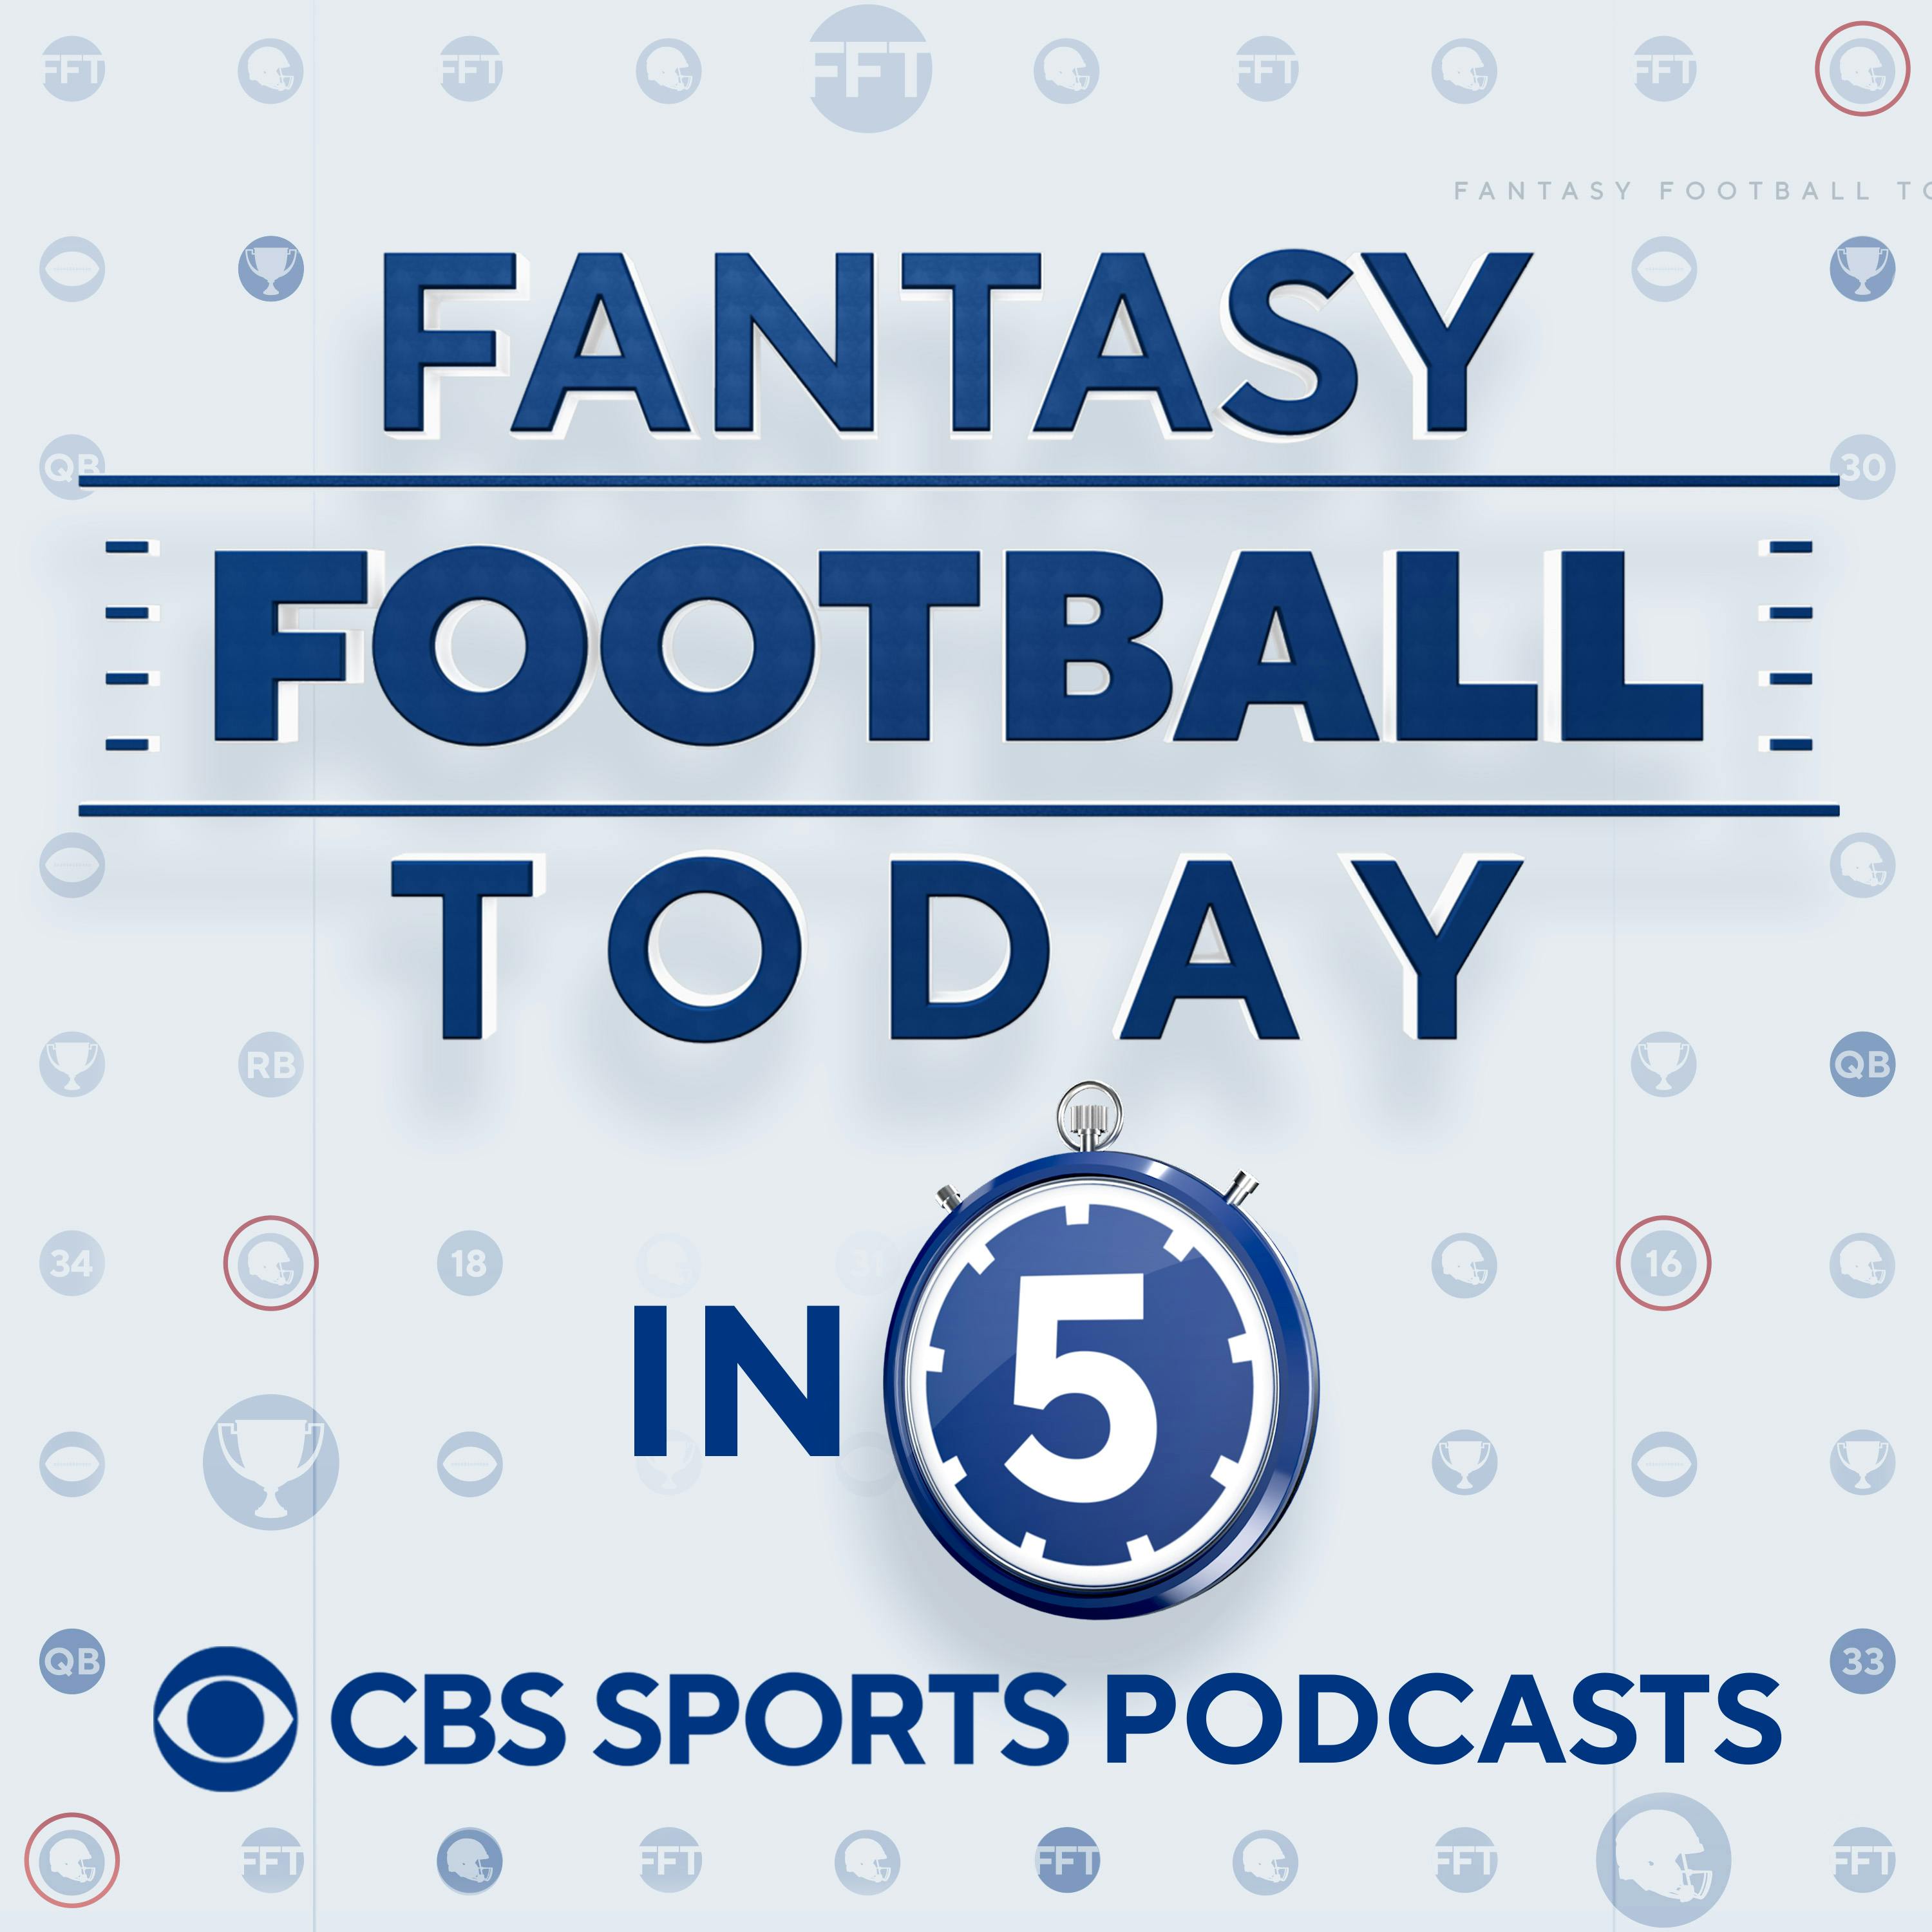 FFT in 5 - Top WR Prospects & Ideal Landing Spots Revealed! (03/28 Fantasy Football Podcast)